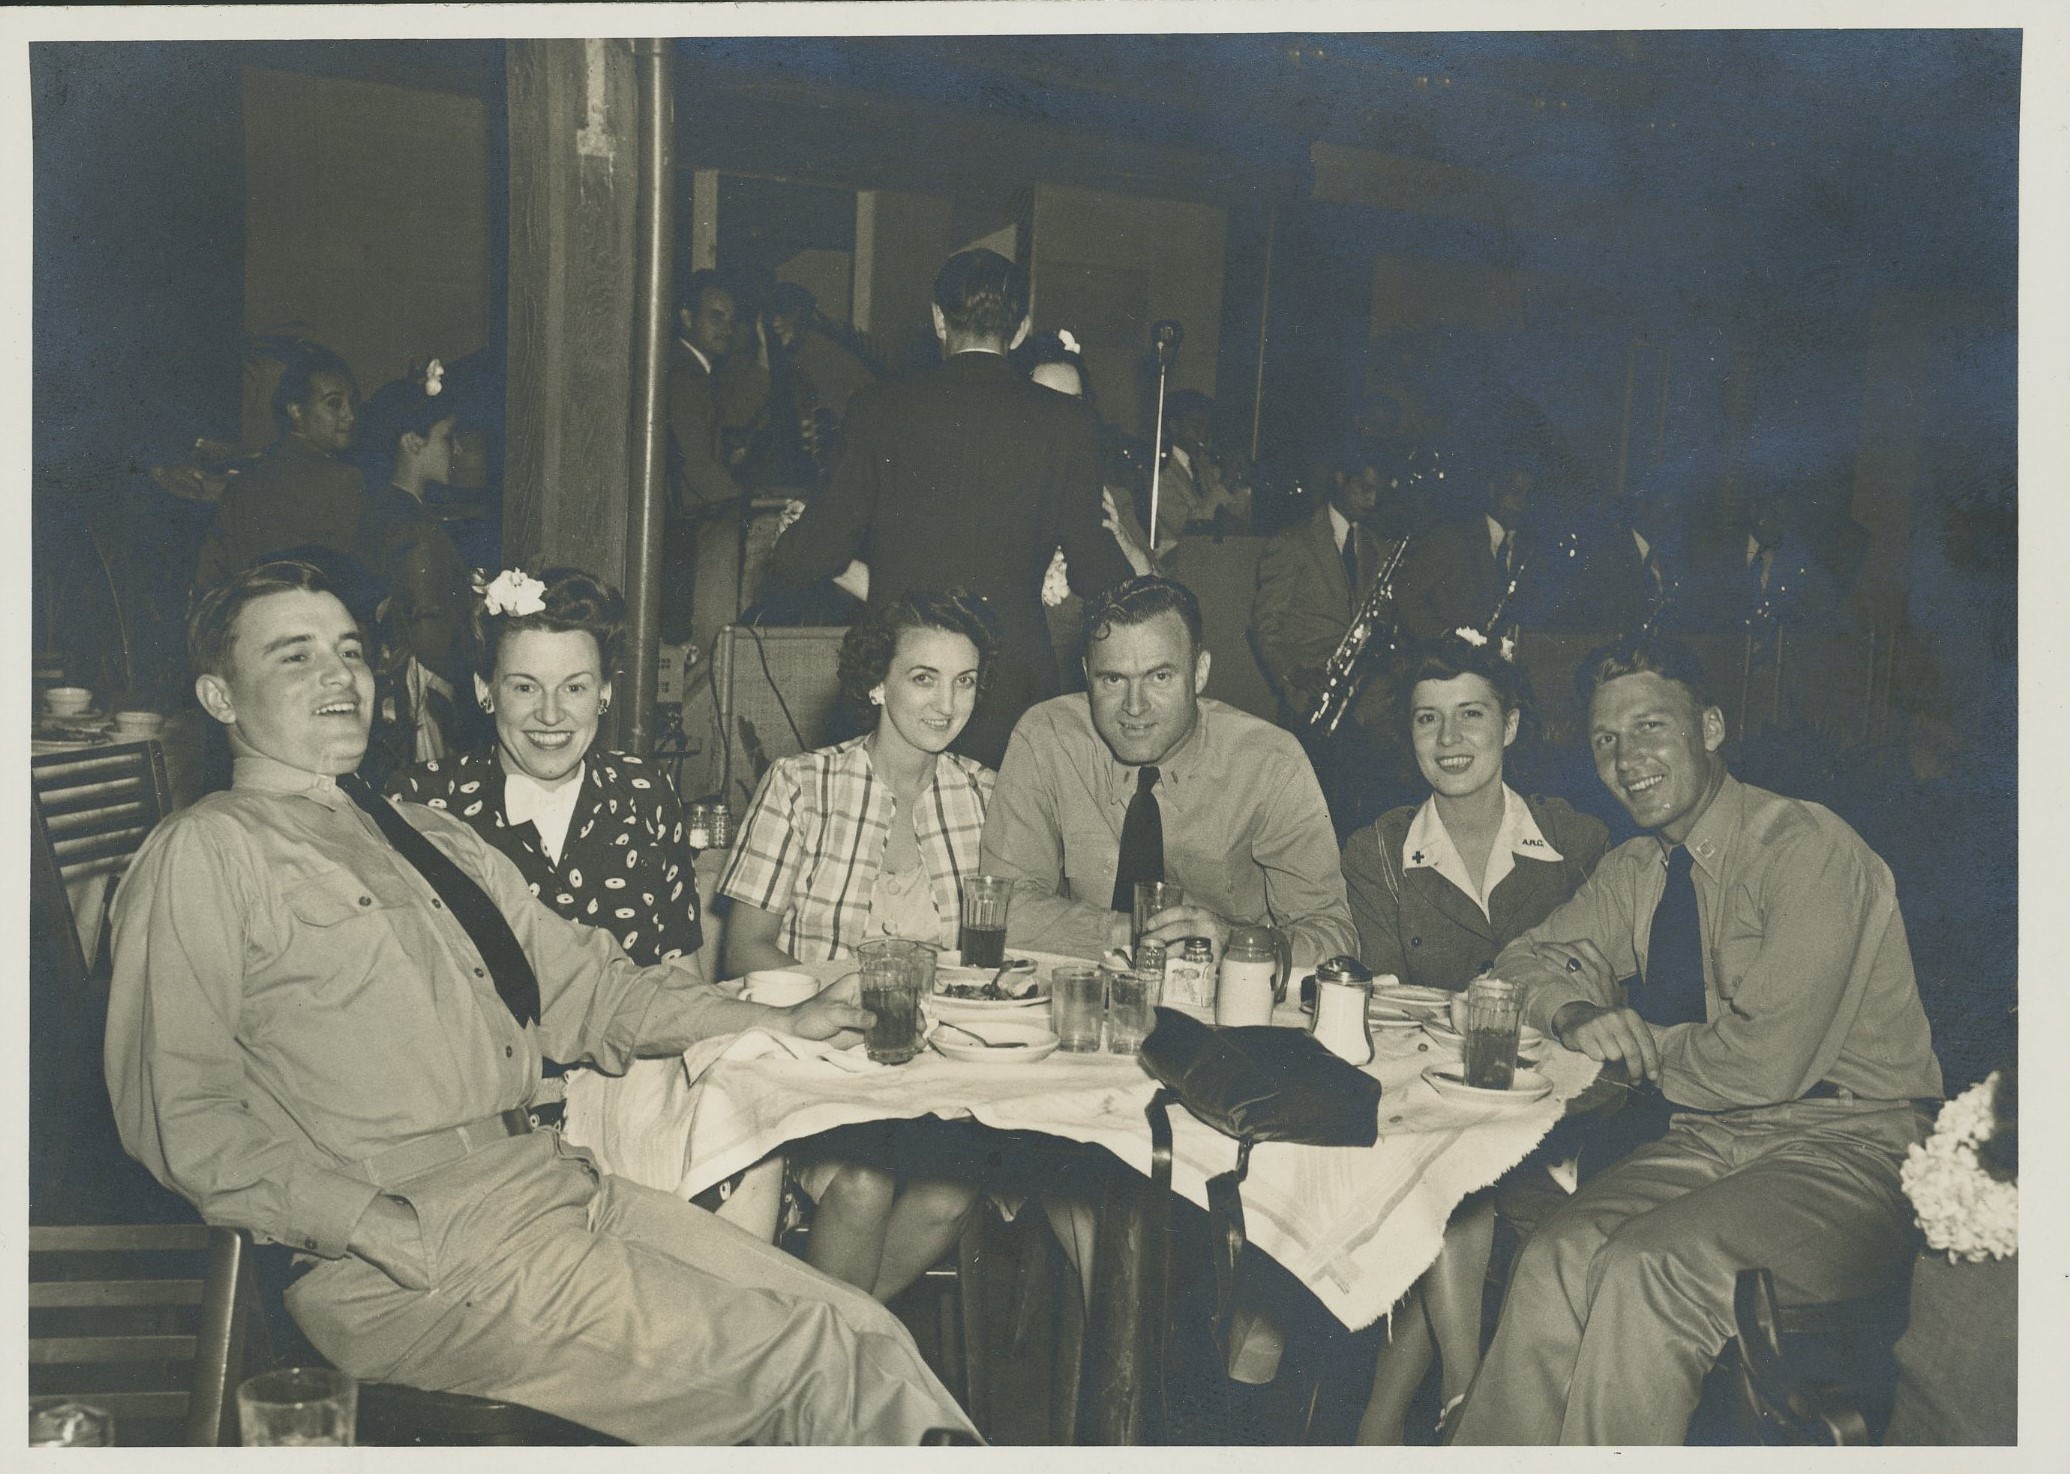 Black and white photograph of three couples of men and women at a restaurant. The men are in military uniforms.